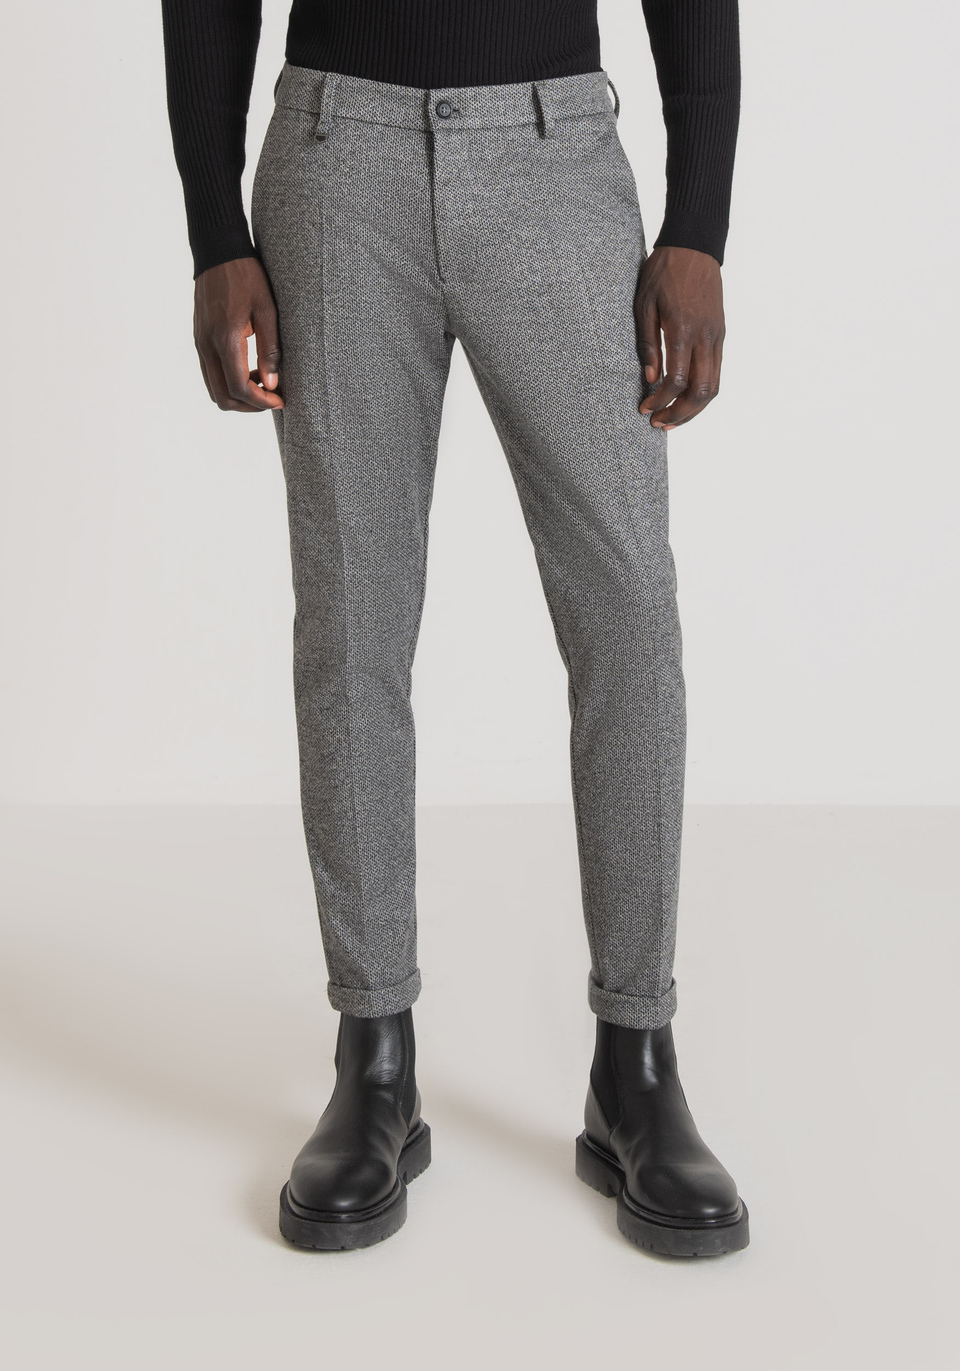 "ASHE" SUPER SKINNY FIT TROUSERS IN ELASTIC VISCOSE BLEND FABRIC - Antony Morato Online Shop